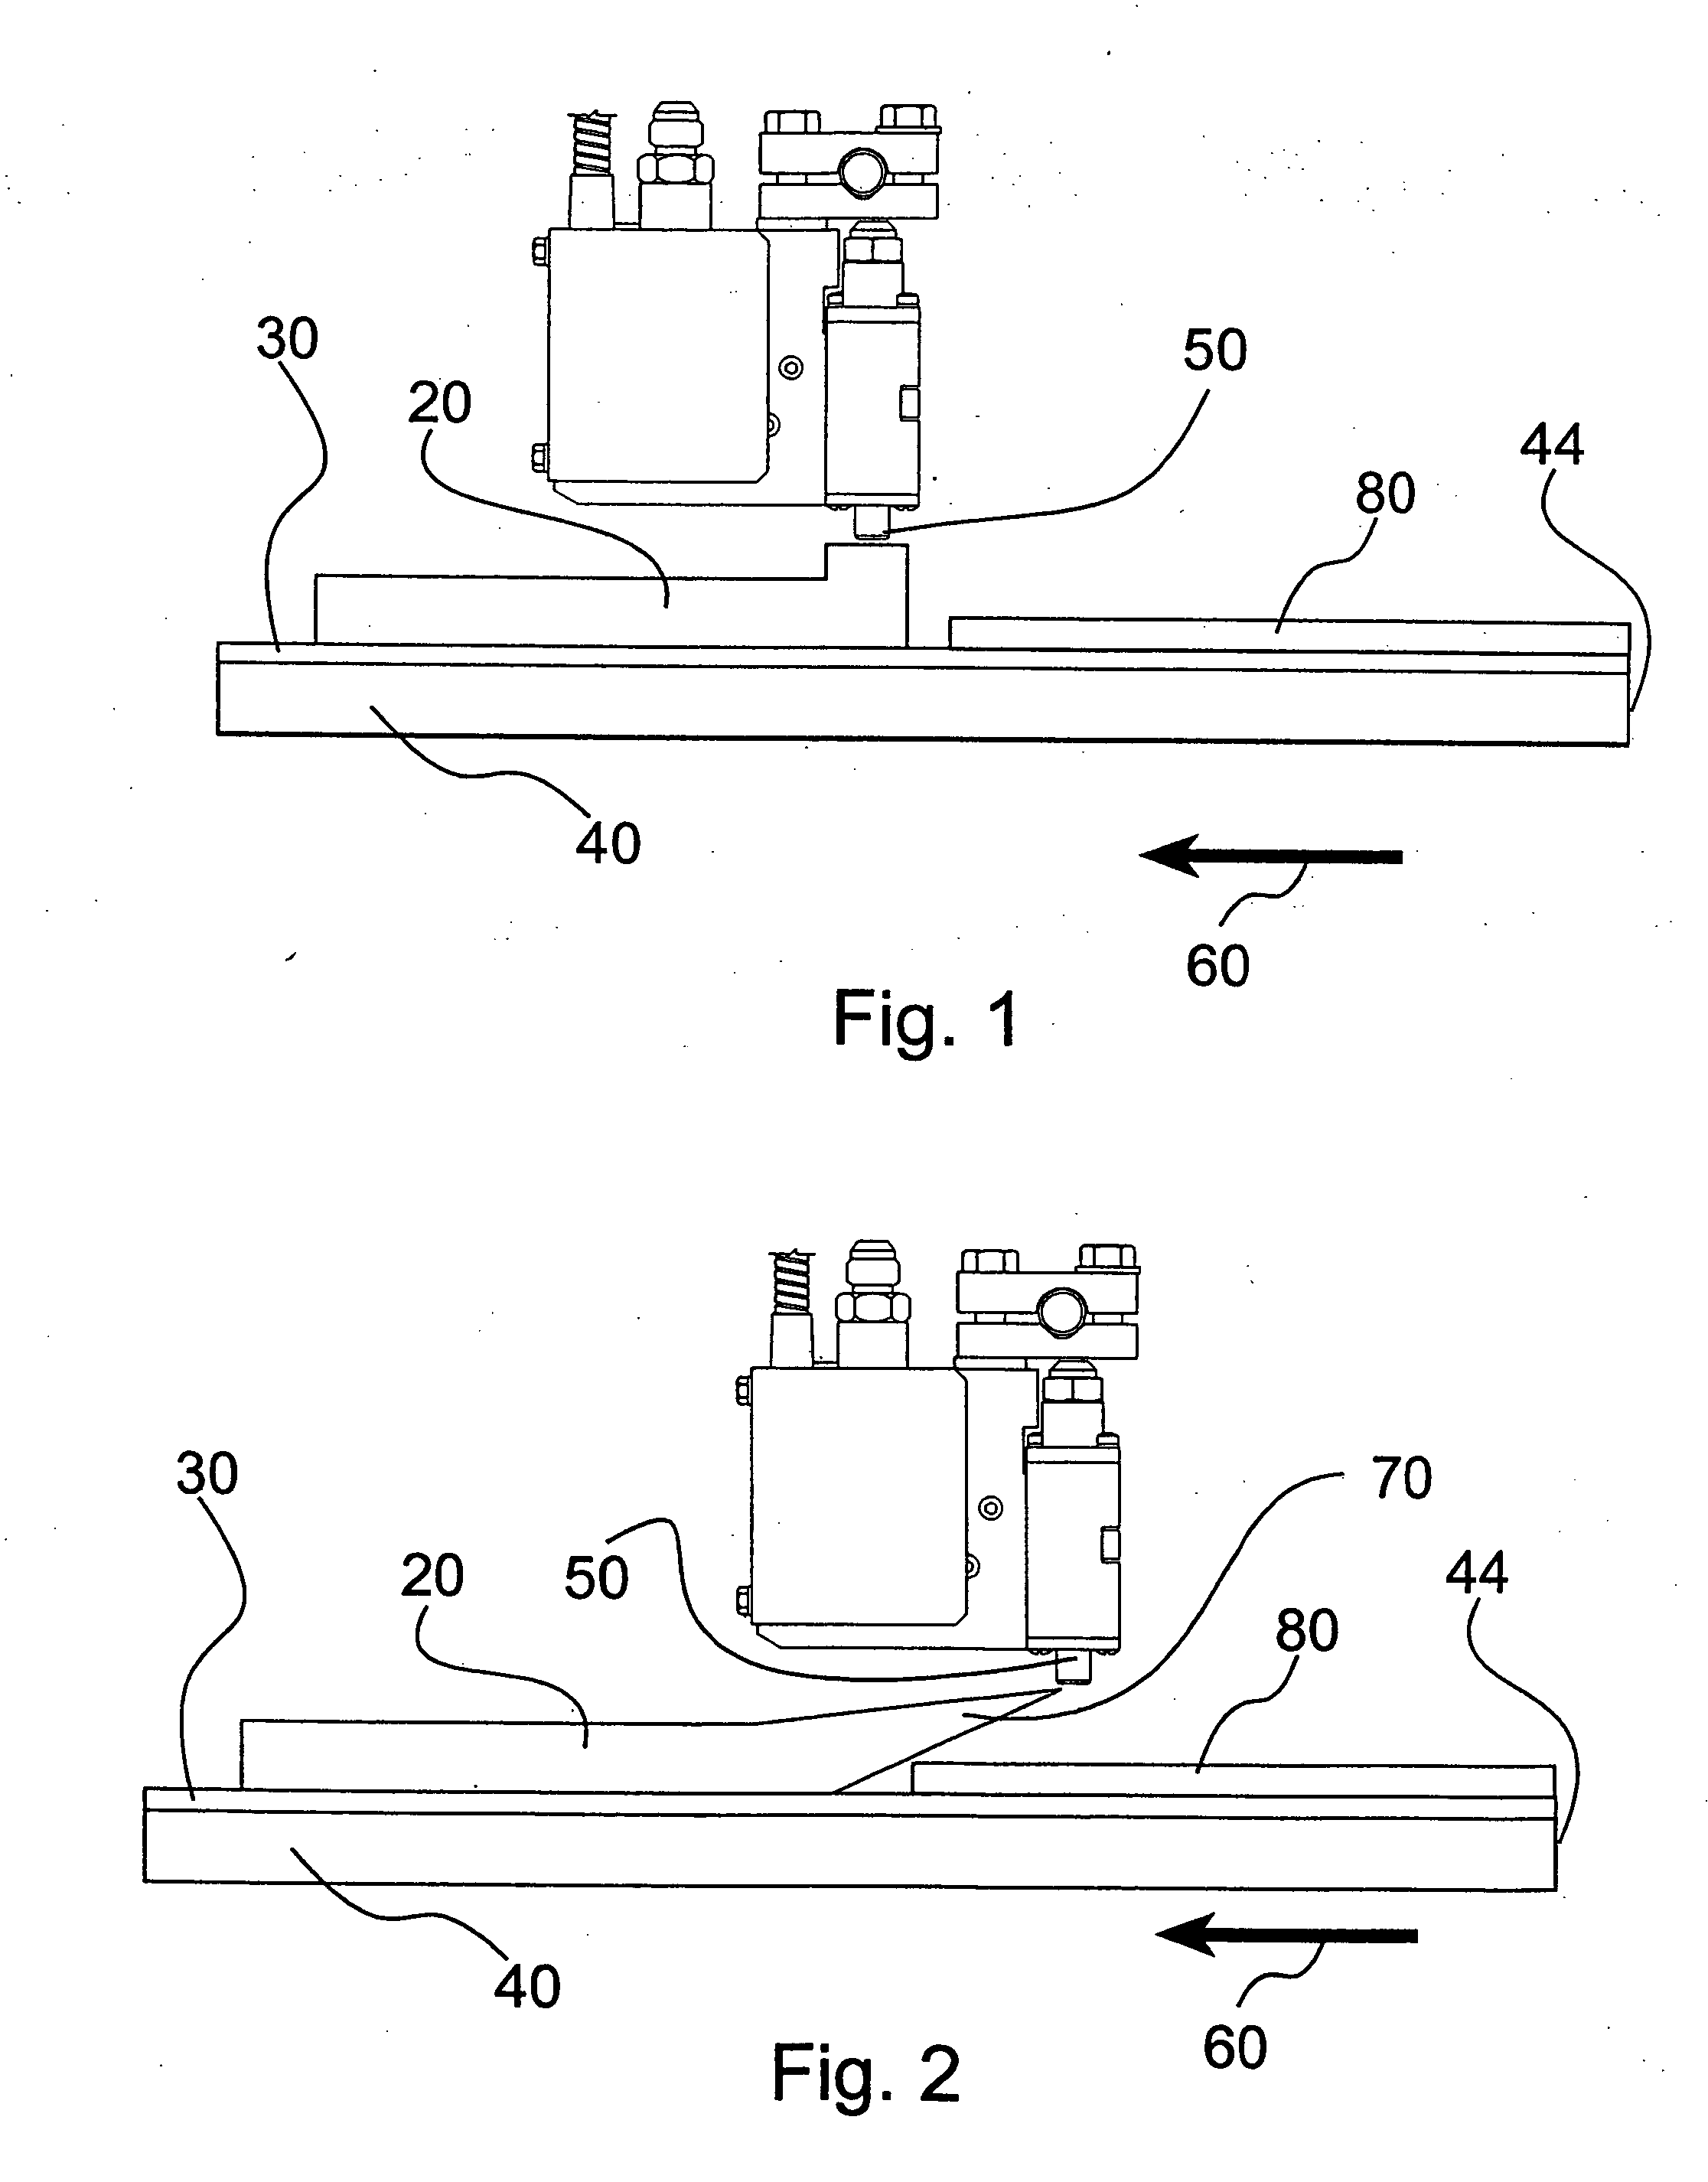 Transfer glue system and method for a right angle gluing machine